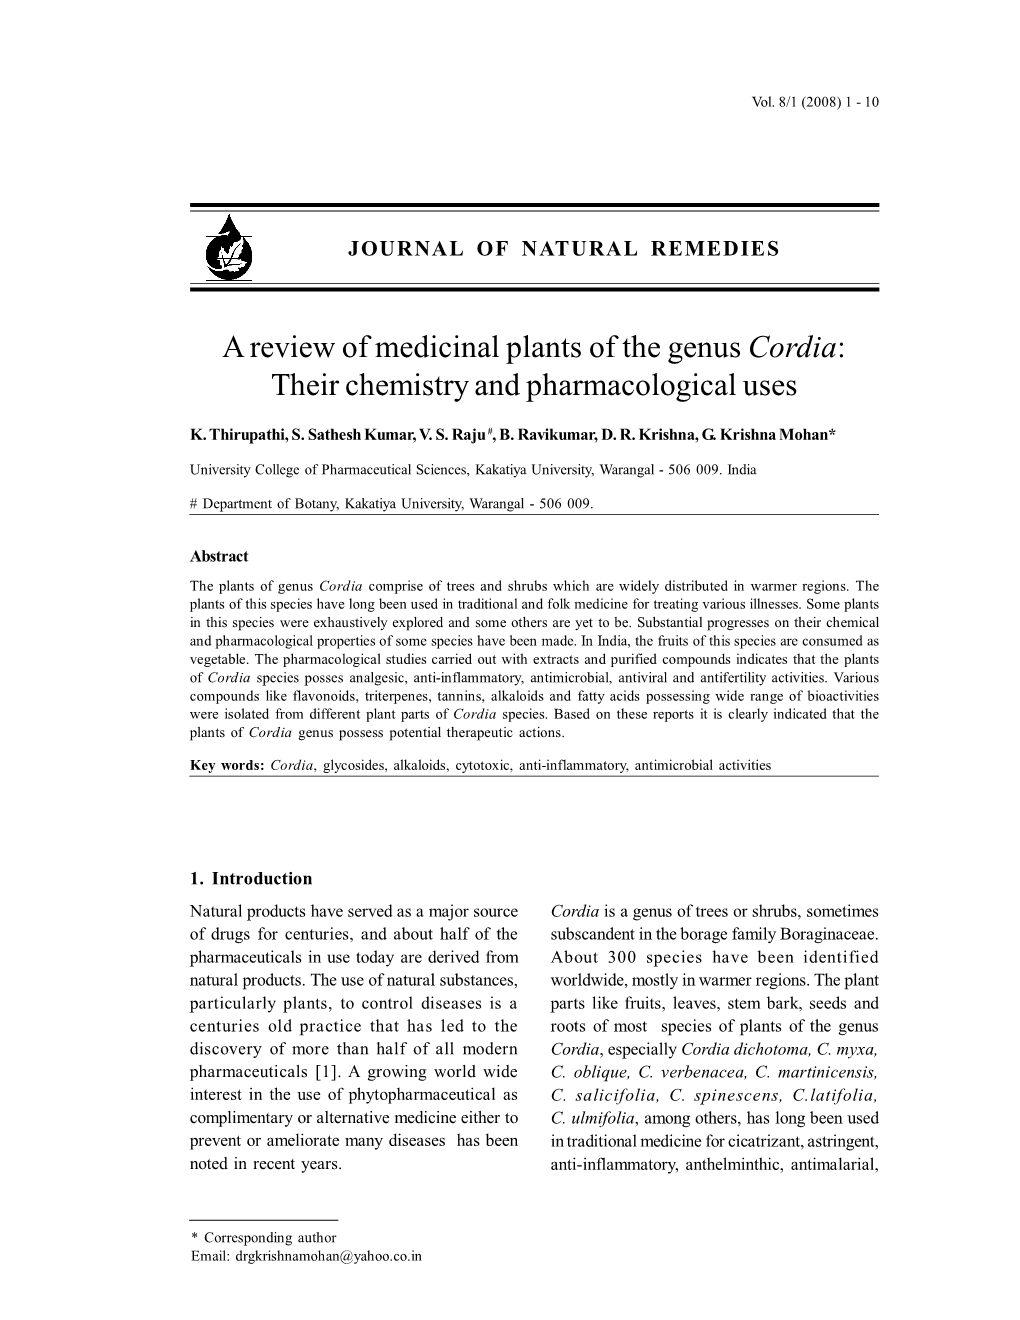 A Review of Medicinal Plants of the Genus Cordia: Their Chemistry and Pharmacological Uses